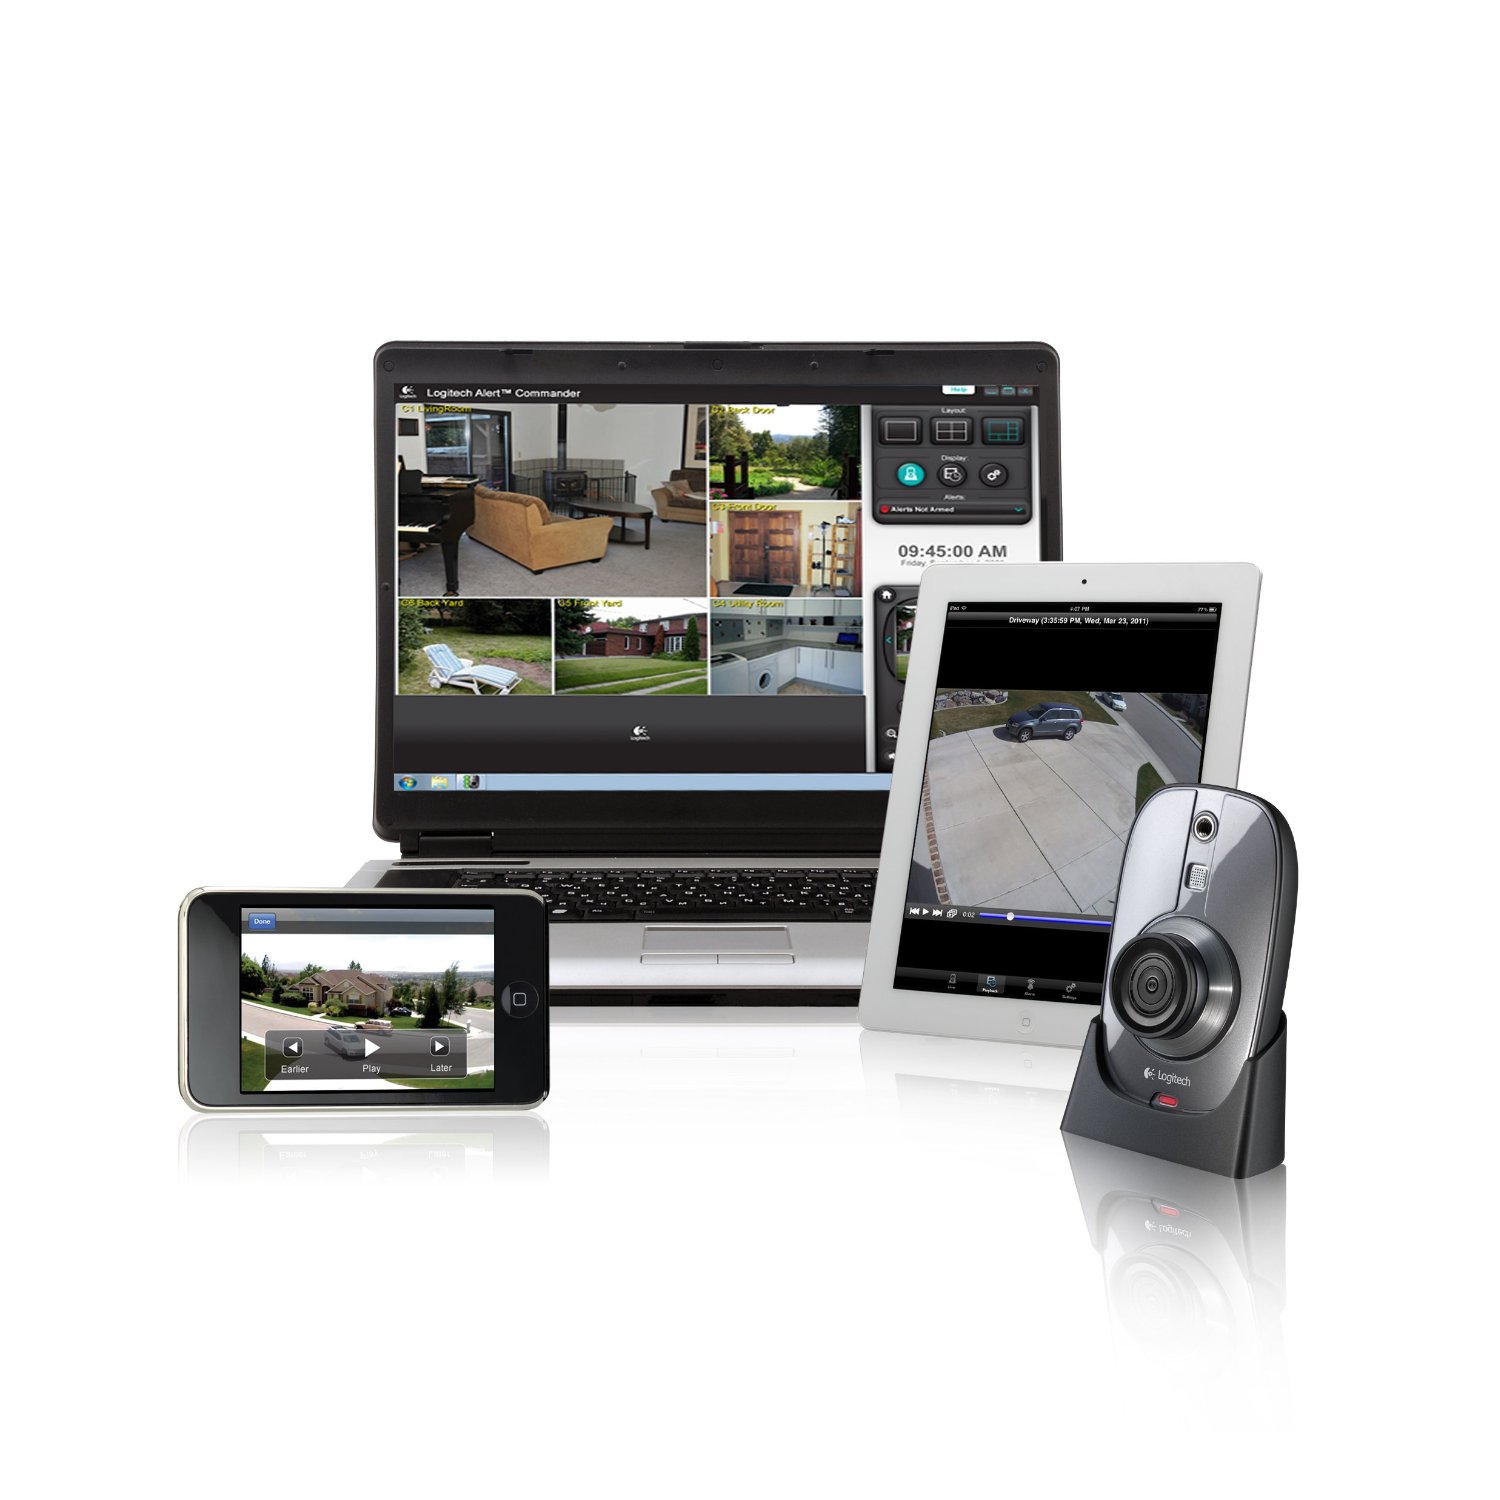 http://thetechjournal.com/wp-content/uploads/images/1110/1319469063-logitech-alert-750i-indoor-master--hdquality-security-system-8.jpg